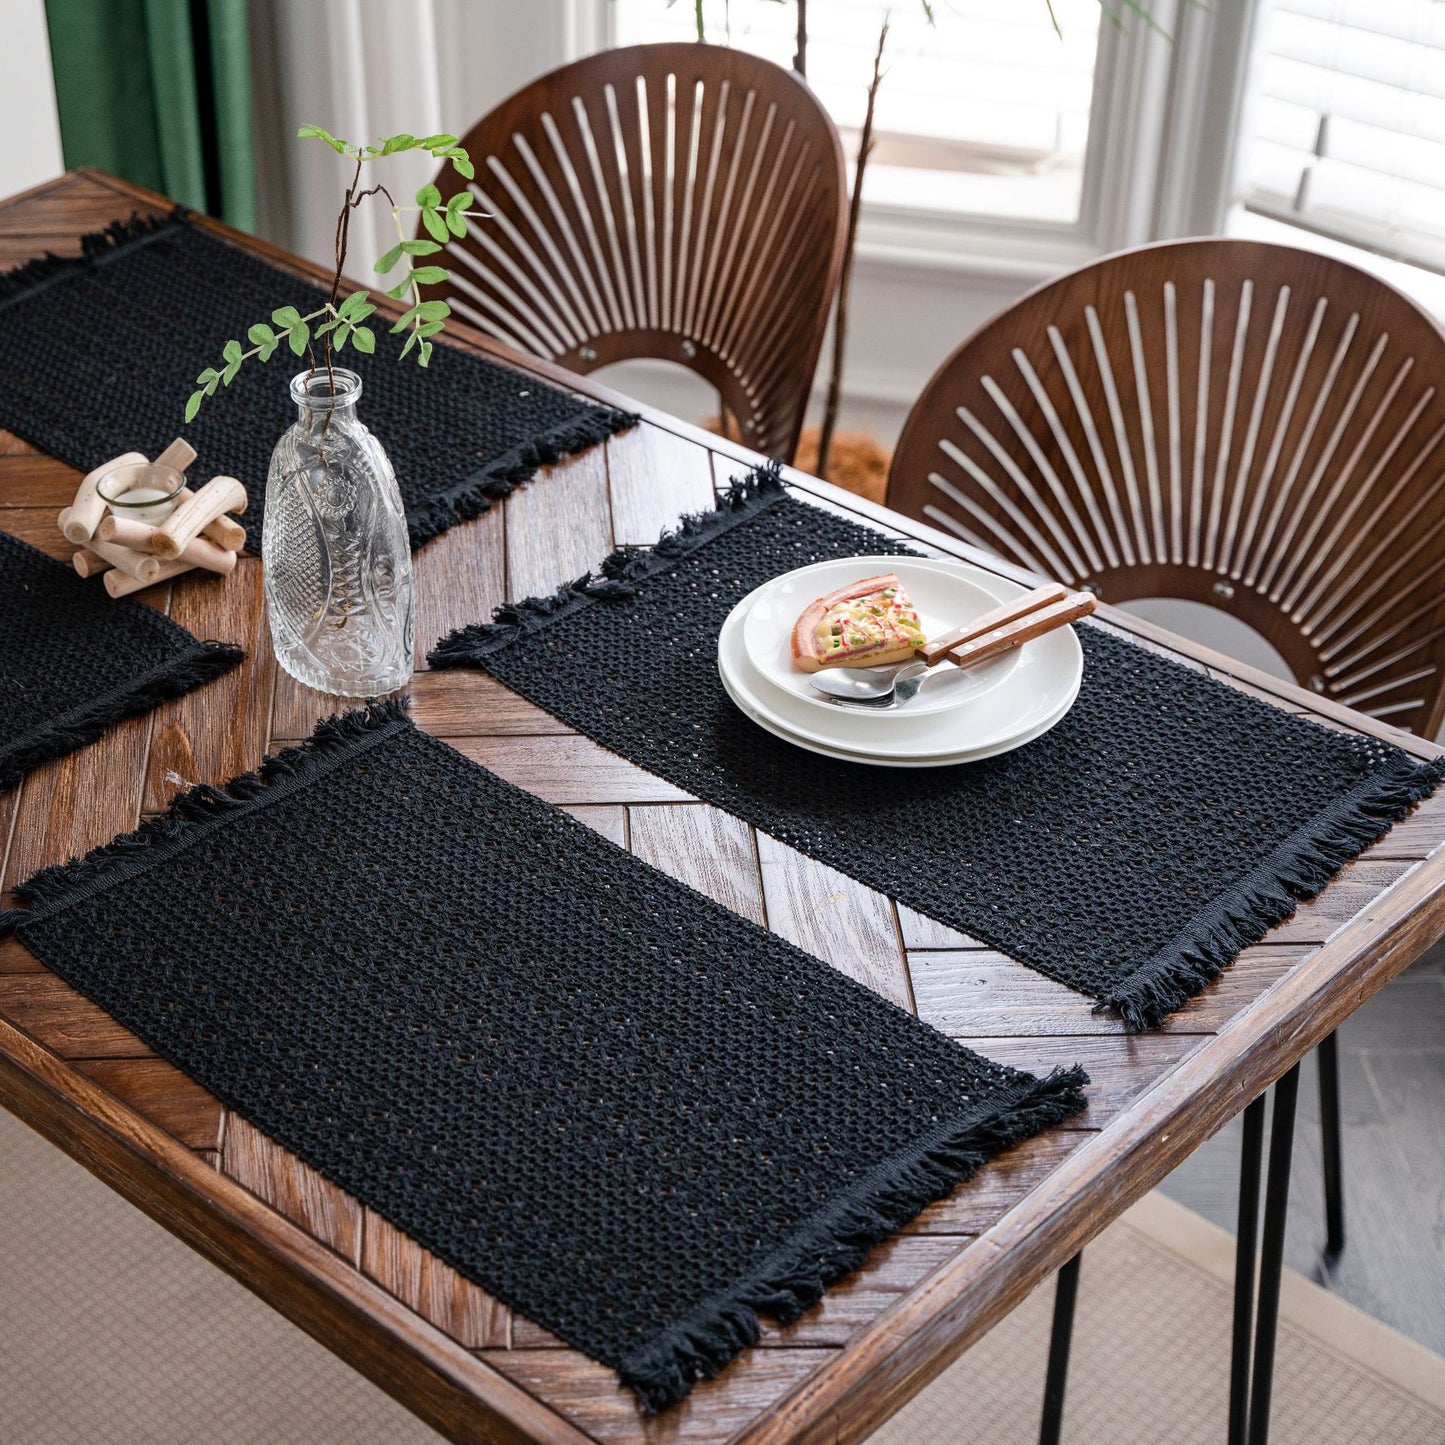 Flax Woven Striped Tassel Festive Placemat